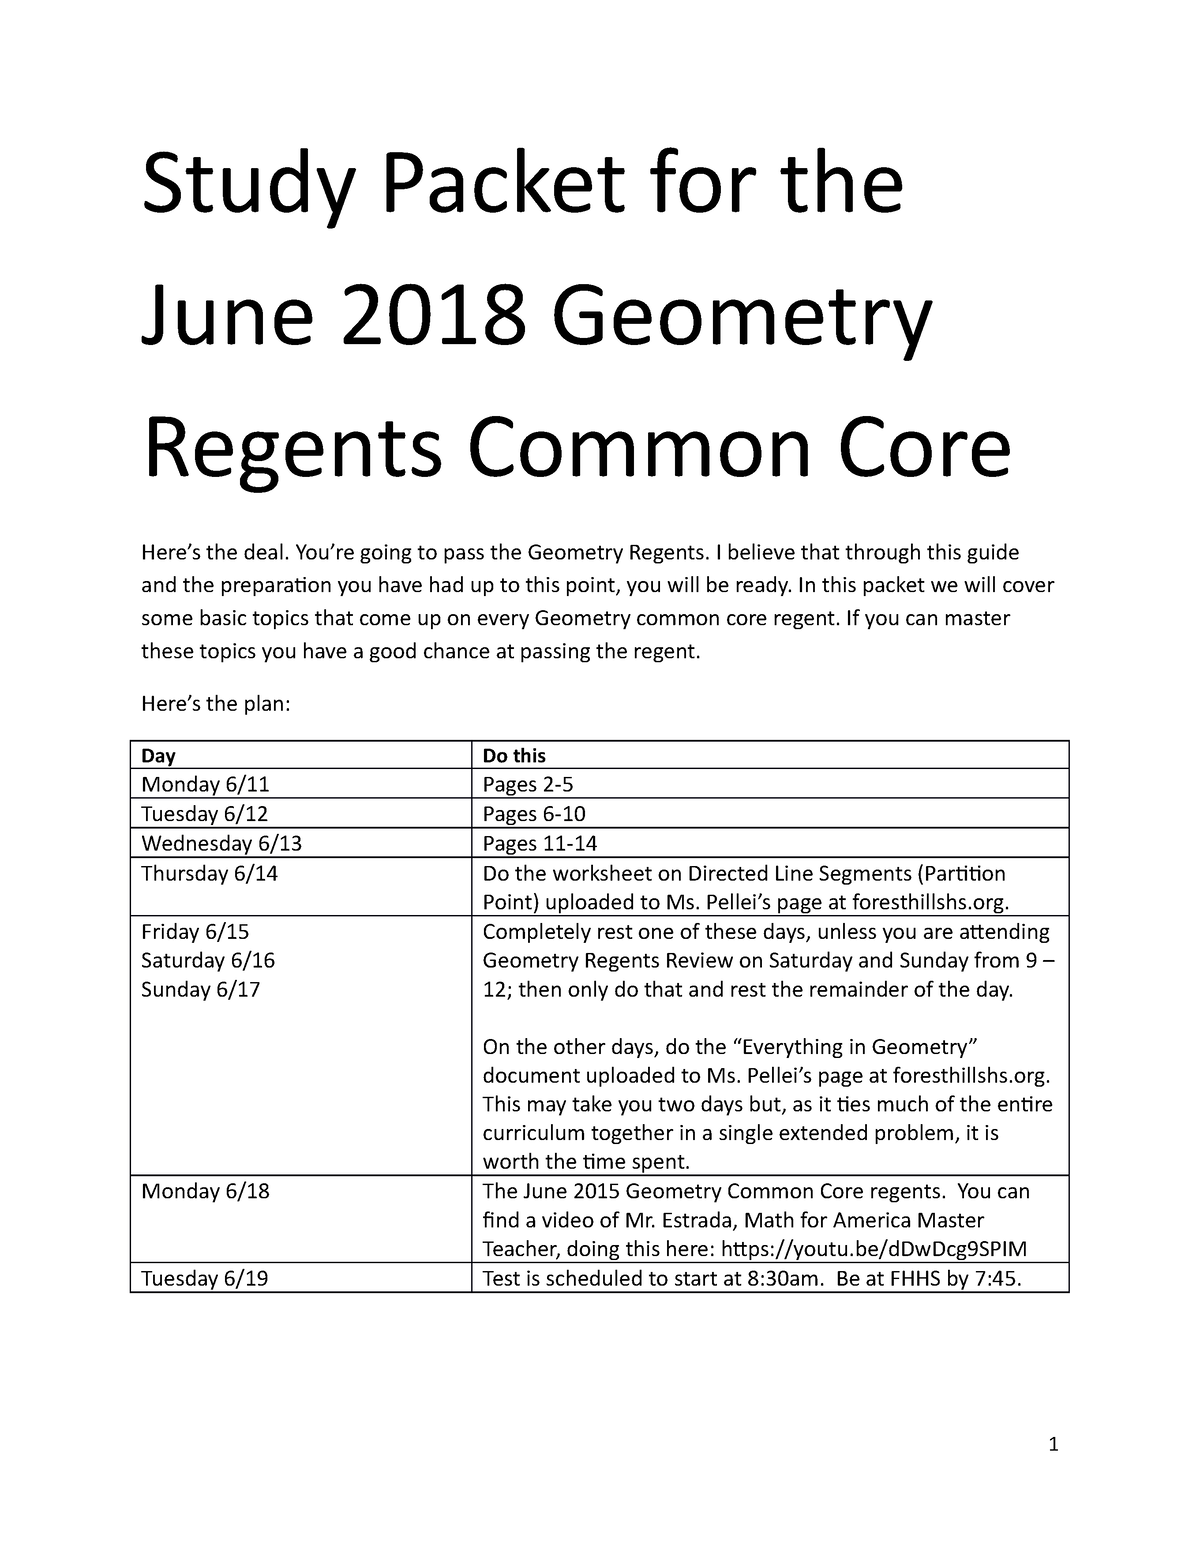 geometry-regents-study-guide-1-study-packet-for-the-june-2018-geometry-regents-common-core